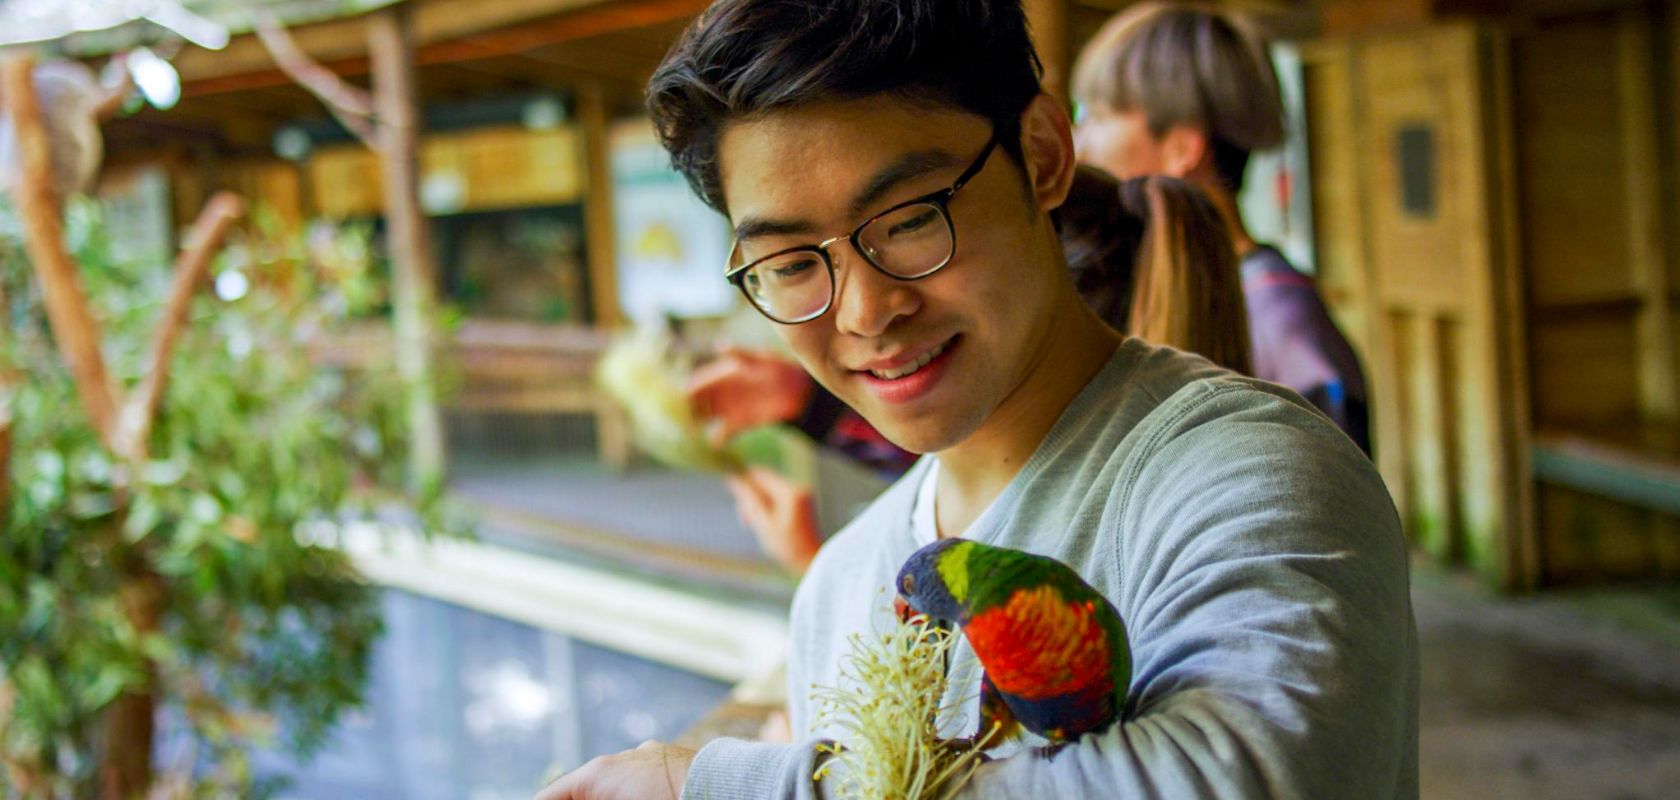 Visitor enjoying an encounter with a local lorikeet at the the bird brunch feeding time in Blackbutt Reserve, Newcastle.